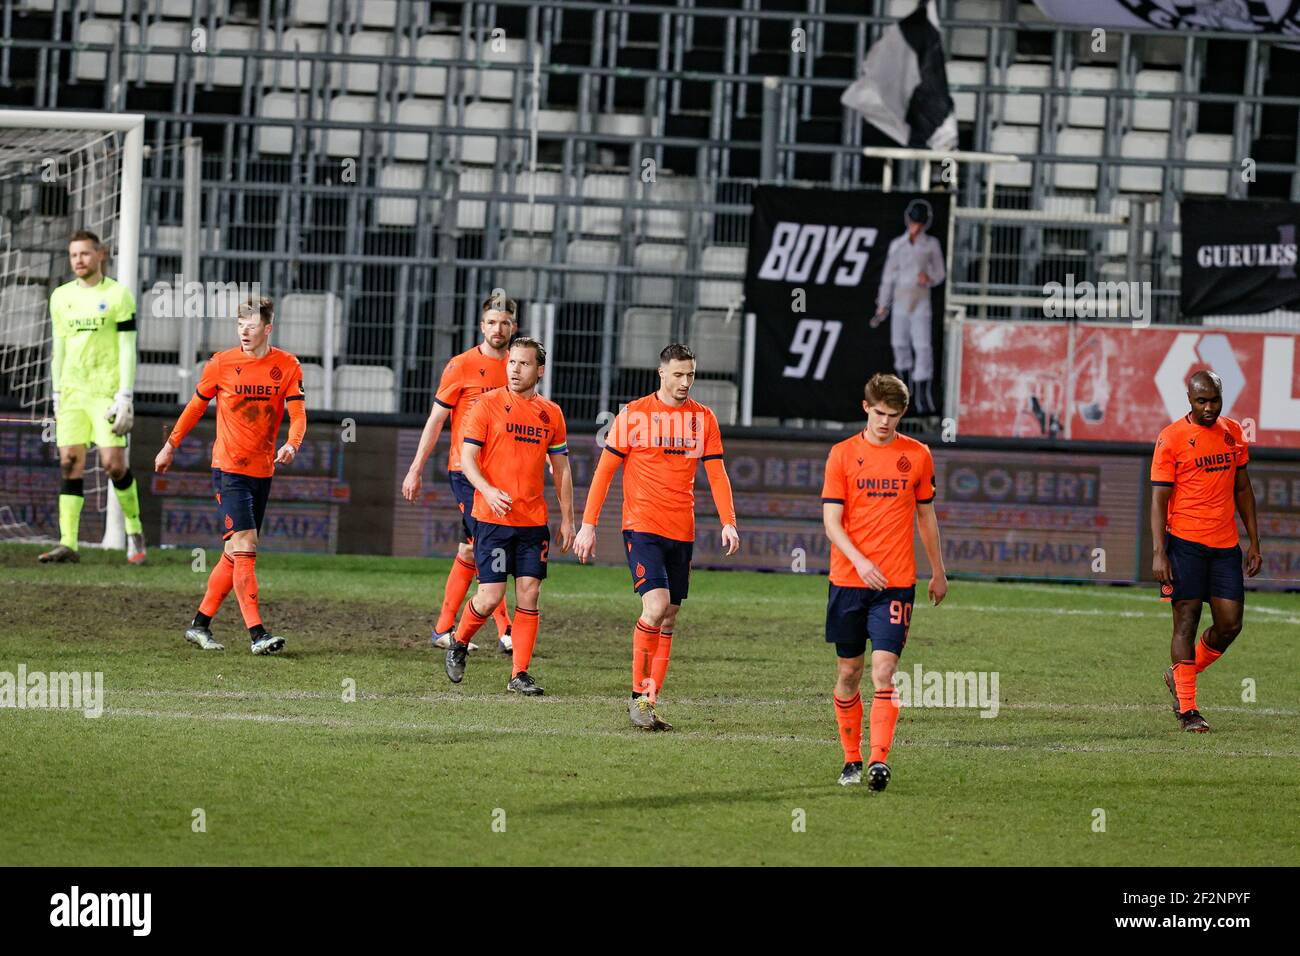 Club's players look dejected during a postponed soccer match between Sporting Charleroi and Club Brugge KV, Friday 12 March 2021 in Charleroi, of day Stock Photo